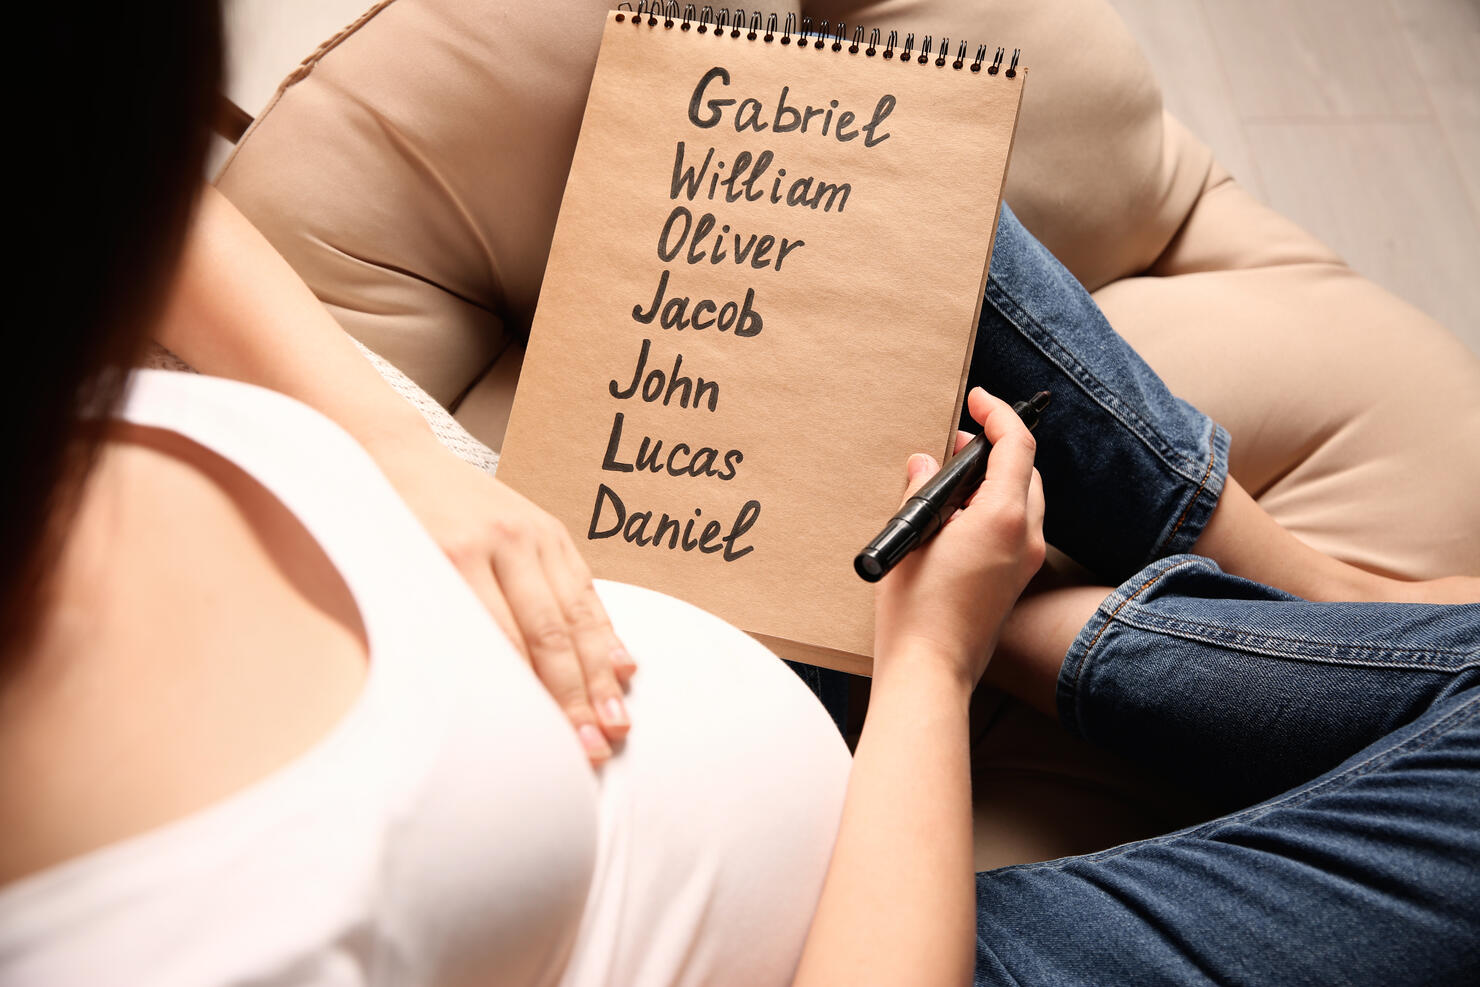 Pregnant woman with baby names list sitting in armchair, closeup